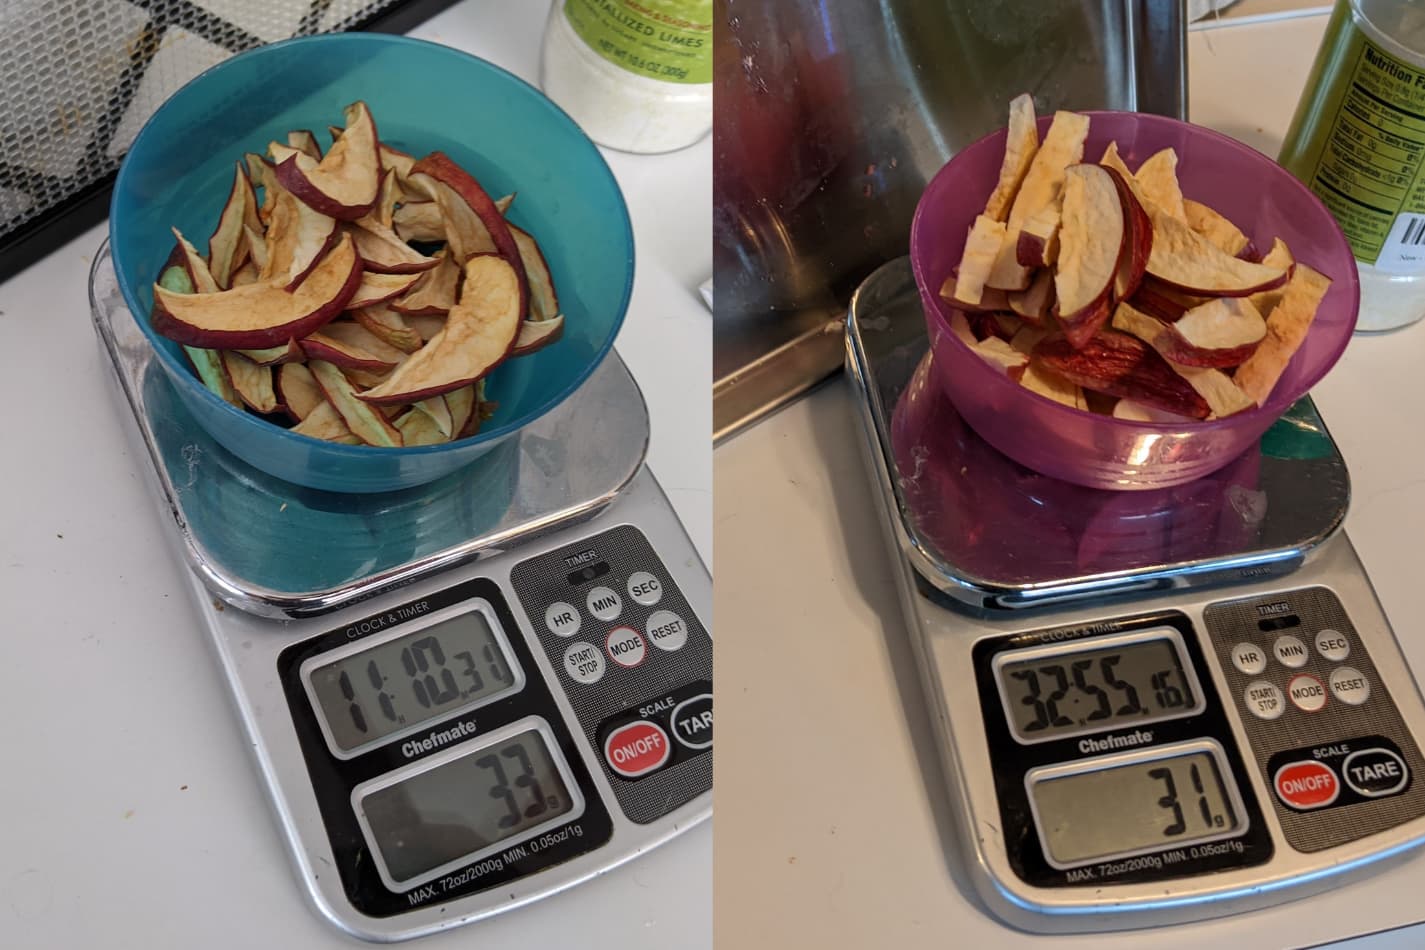 A collage image of two metric system devices with dehydrated fruits in a blue bowl on the left and freeze-dried fruits in a pink bowl on the right.